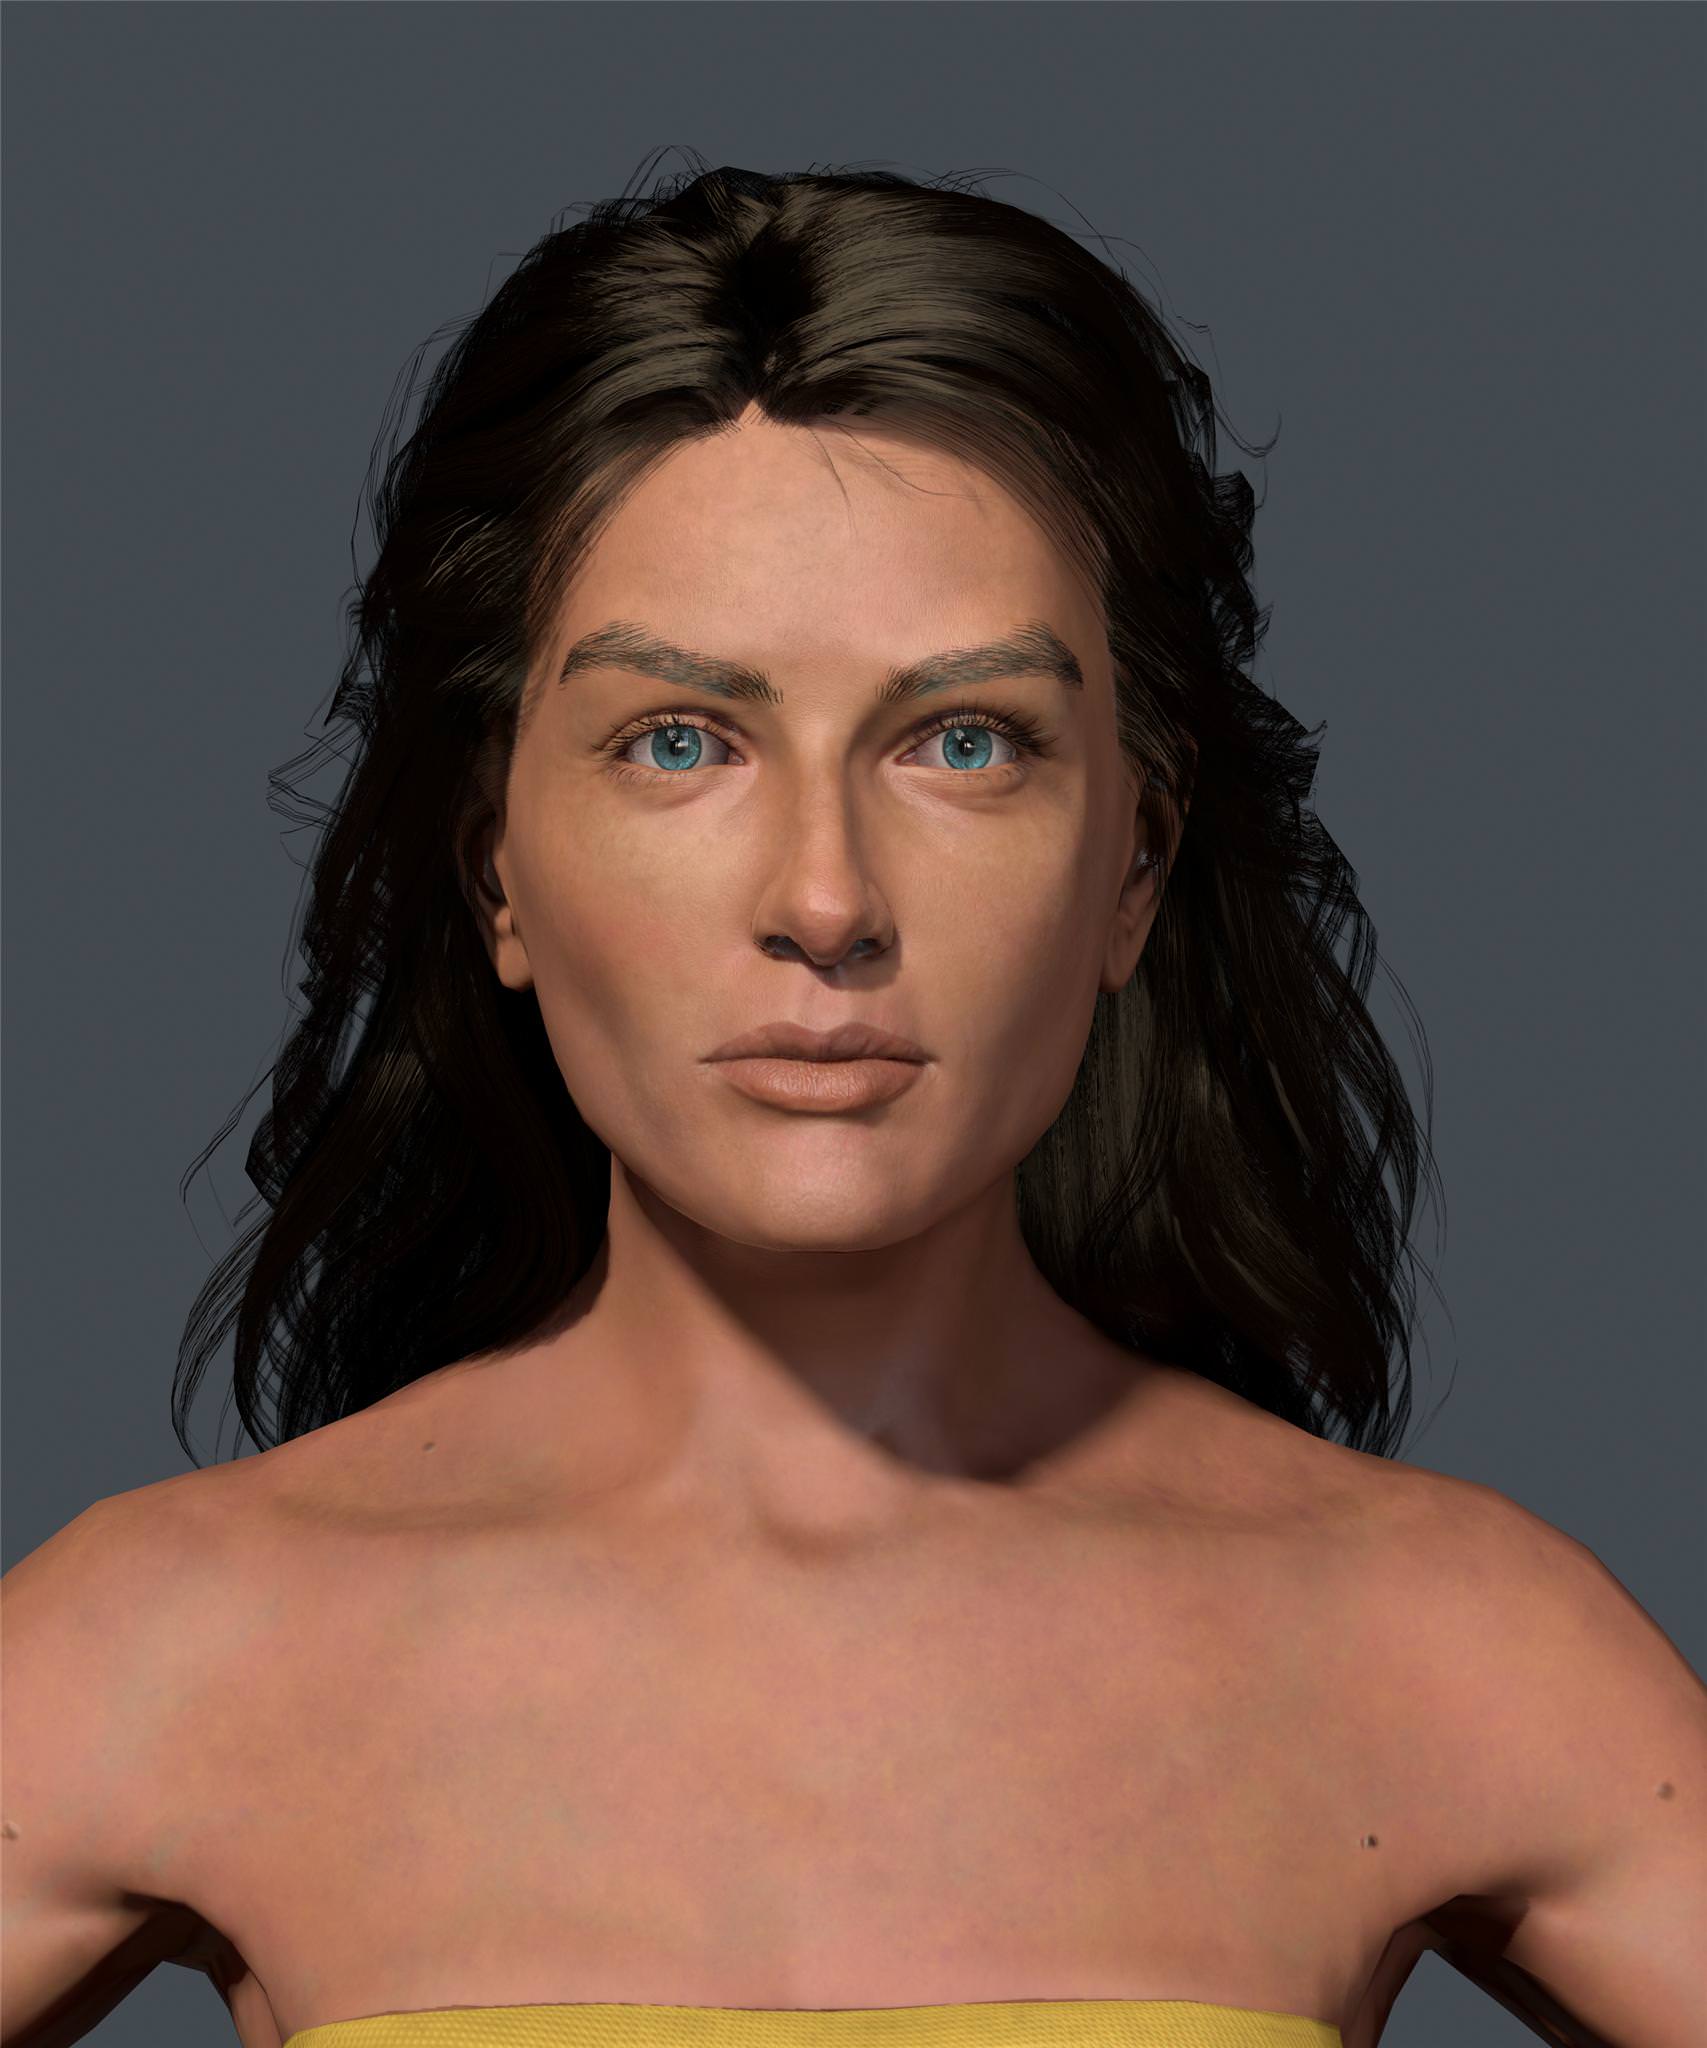 2018-Feb 14: close-up of render of Human character model